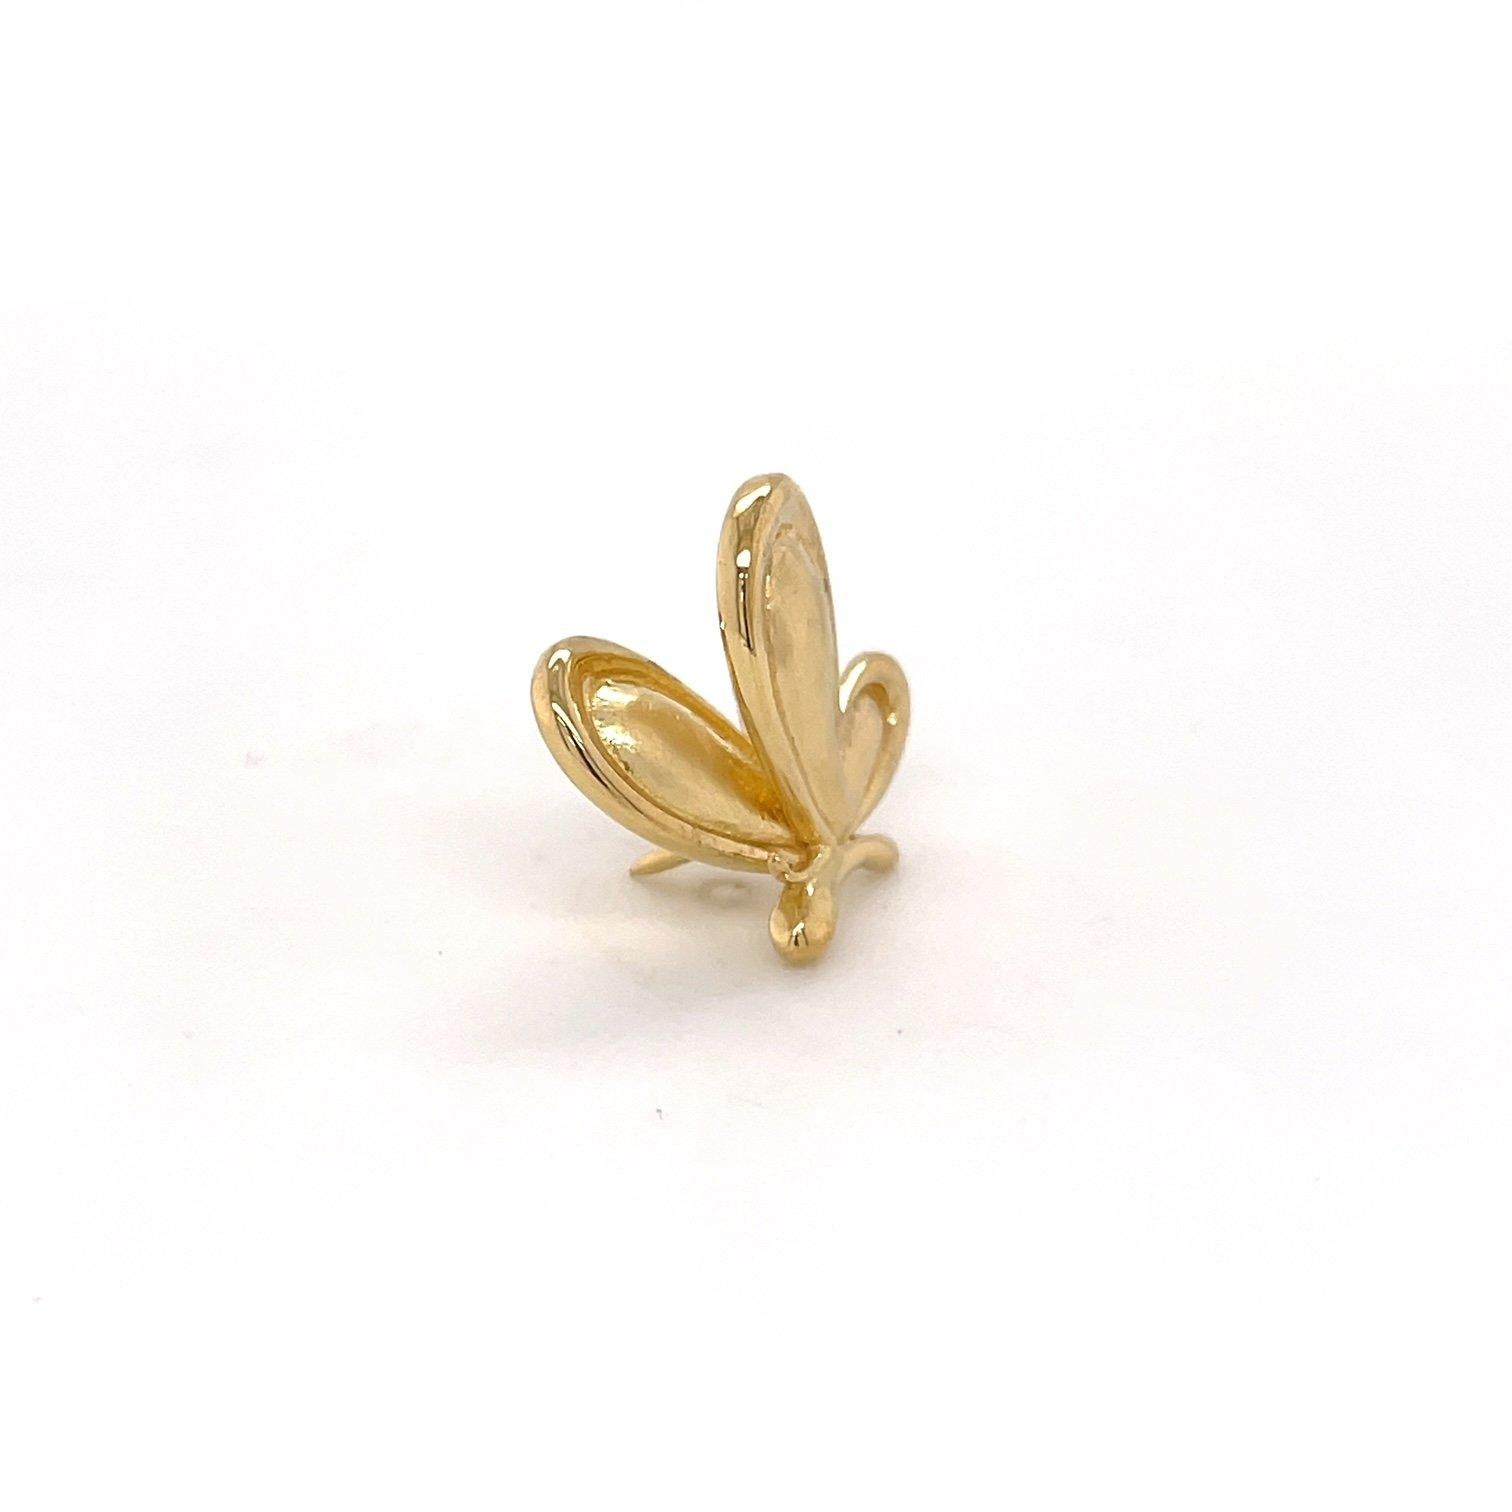 An 18k Yellow Gold butterfly lapel pin. This pin was made and designed by llyn strong.